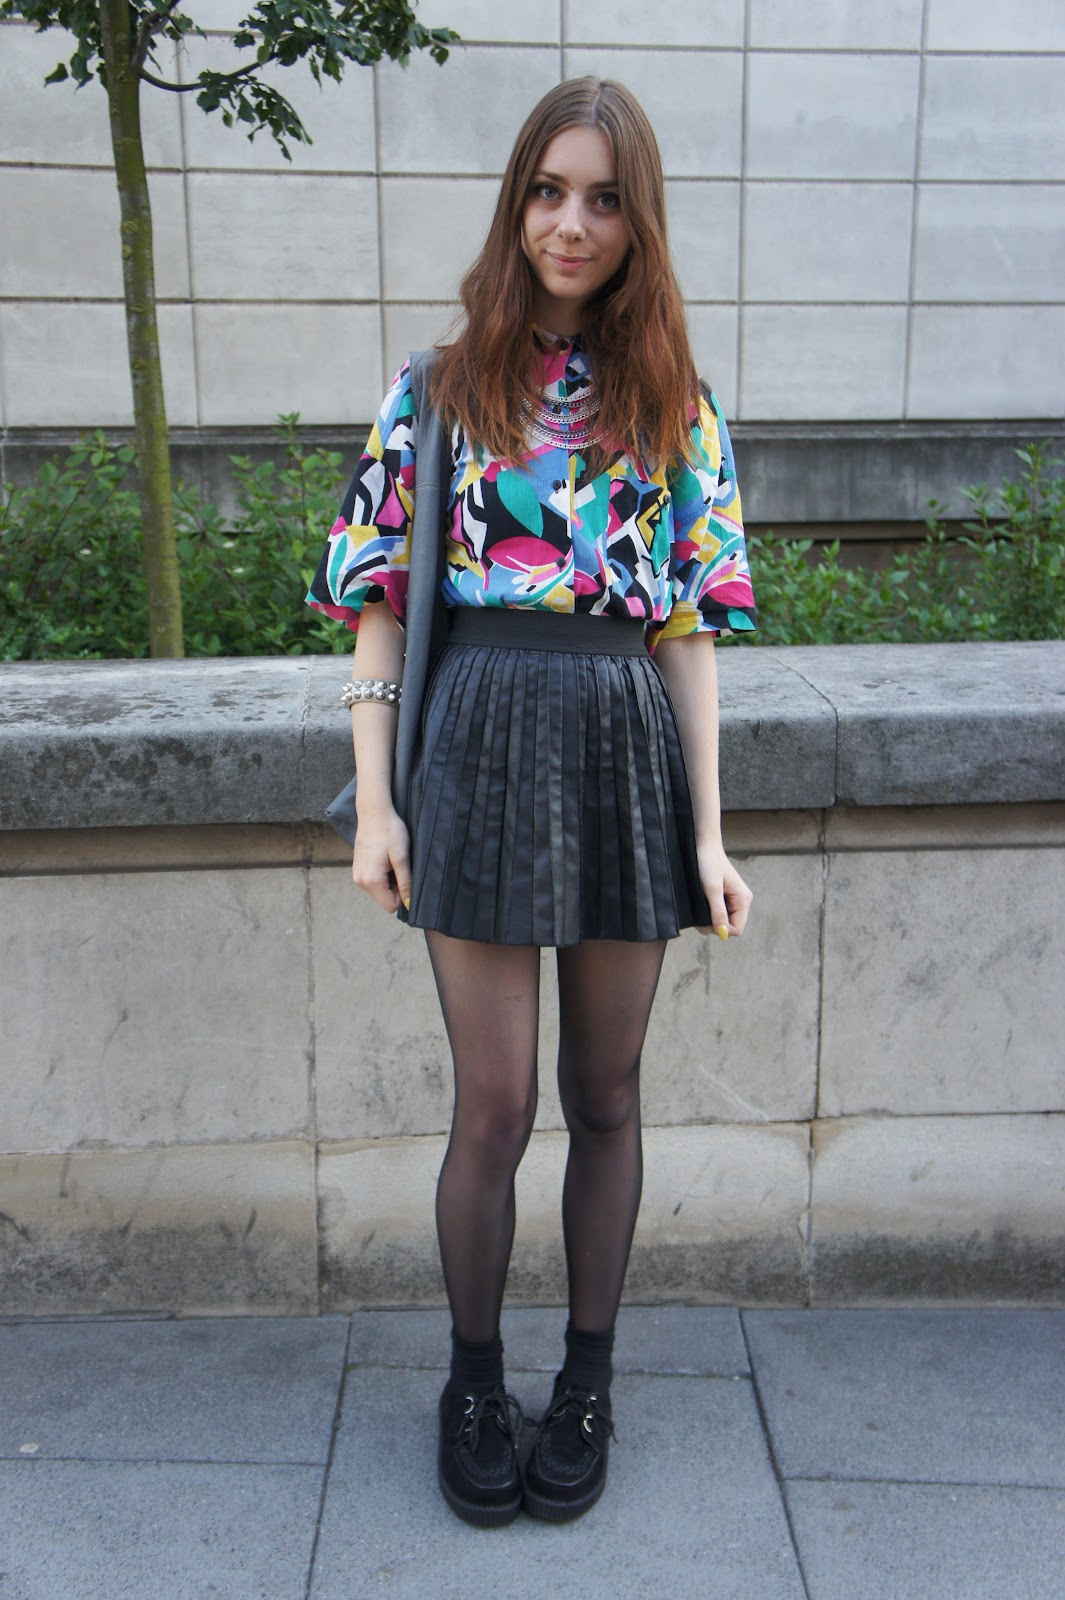 www.chelseajadeloves.co.uk - Fashionmylegs : The tights and hosiery blog